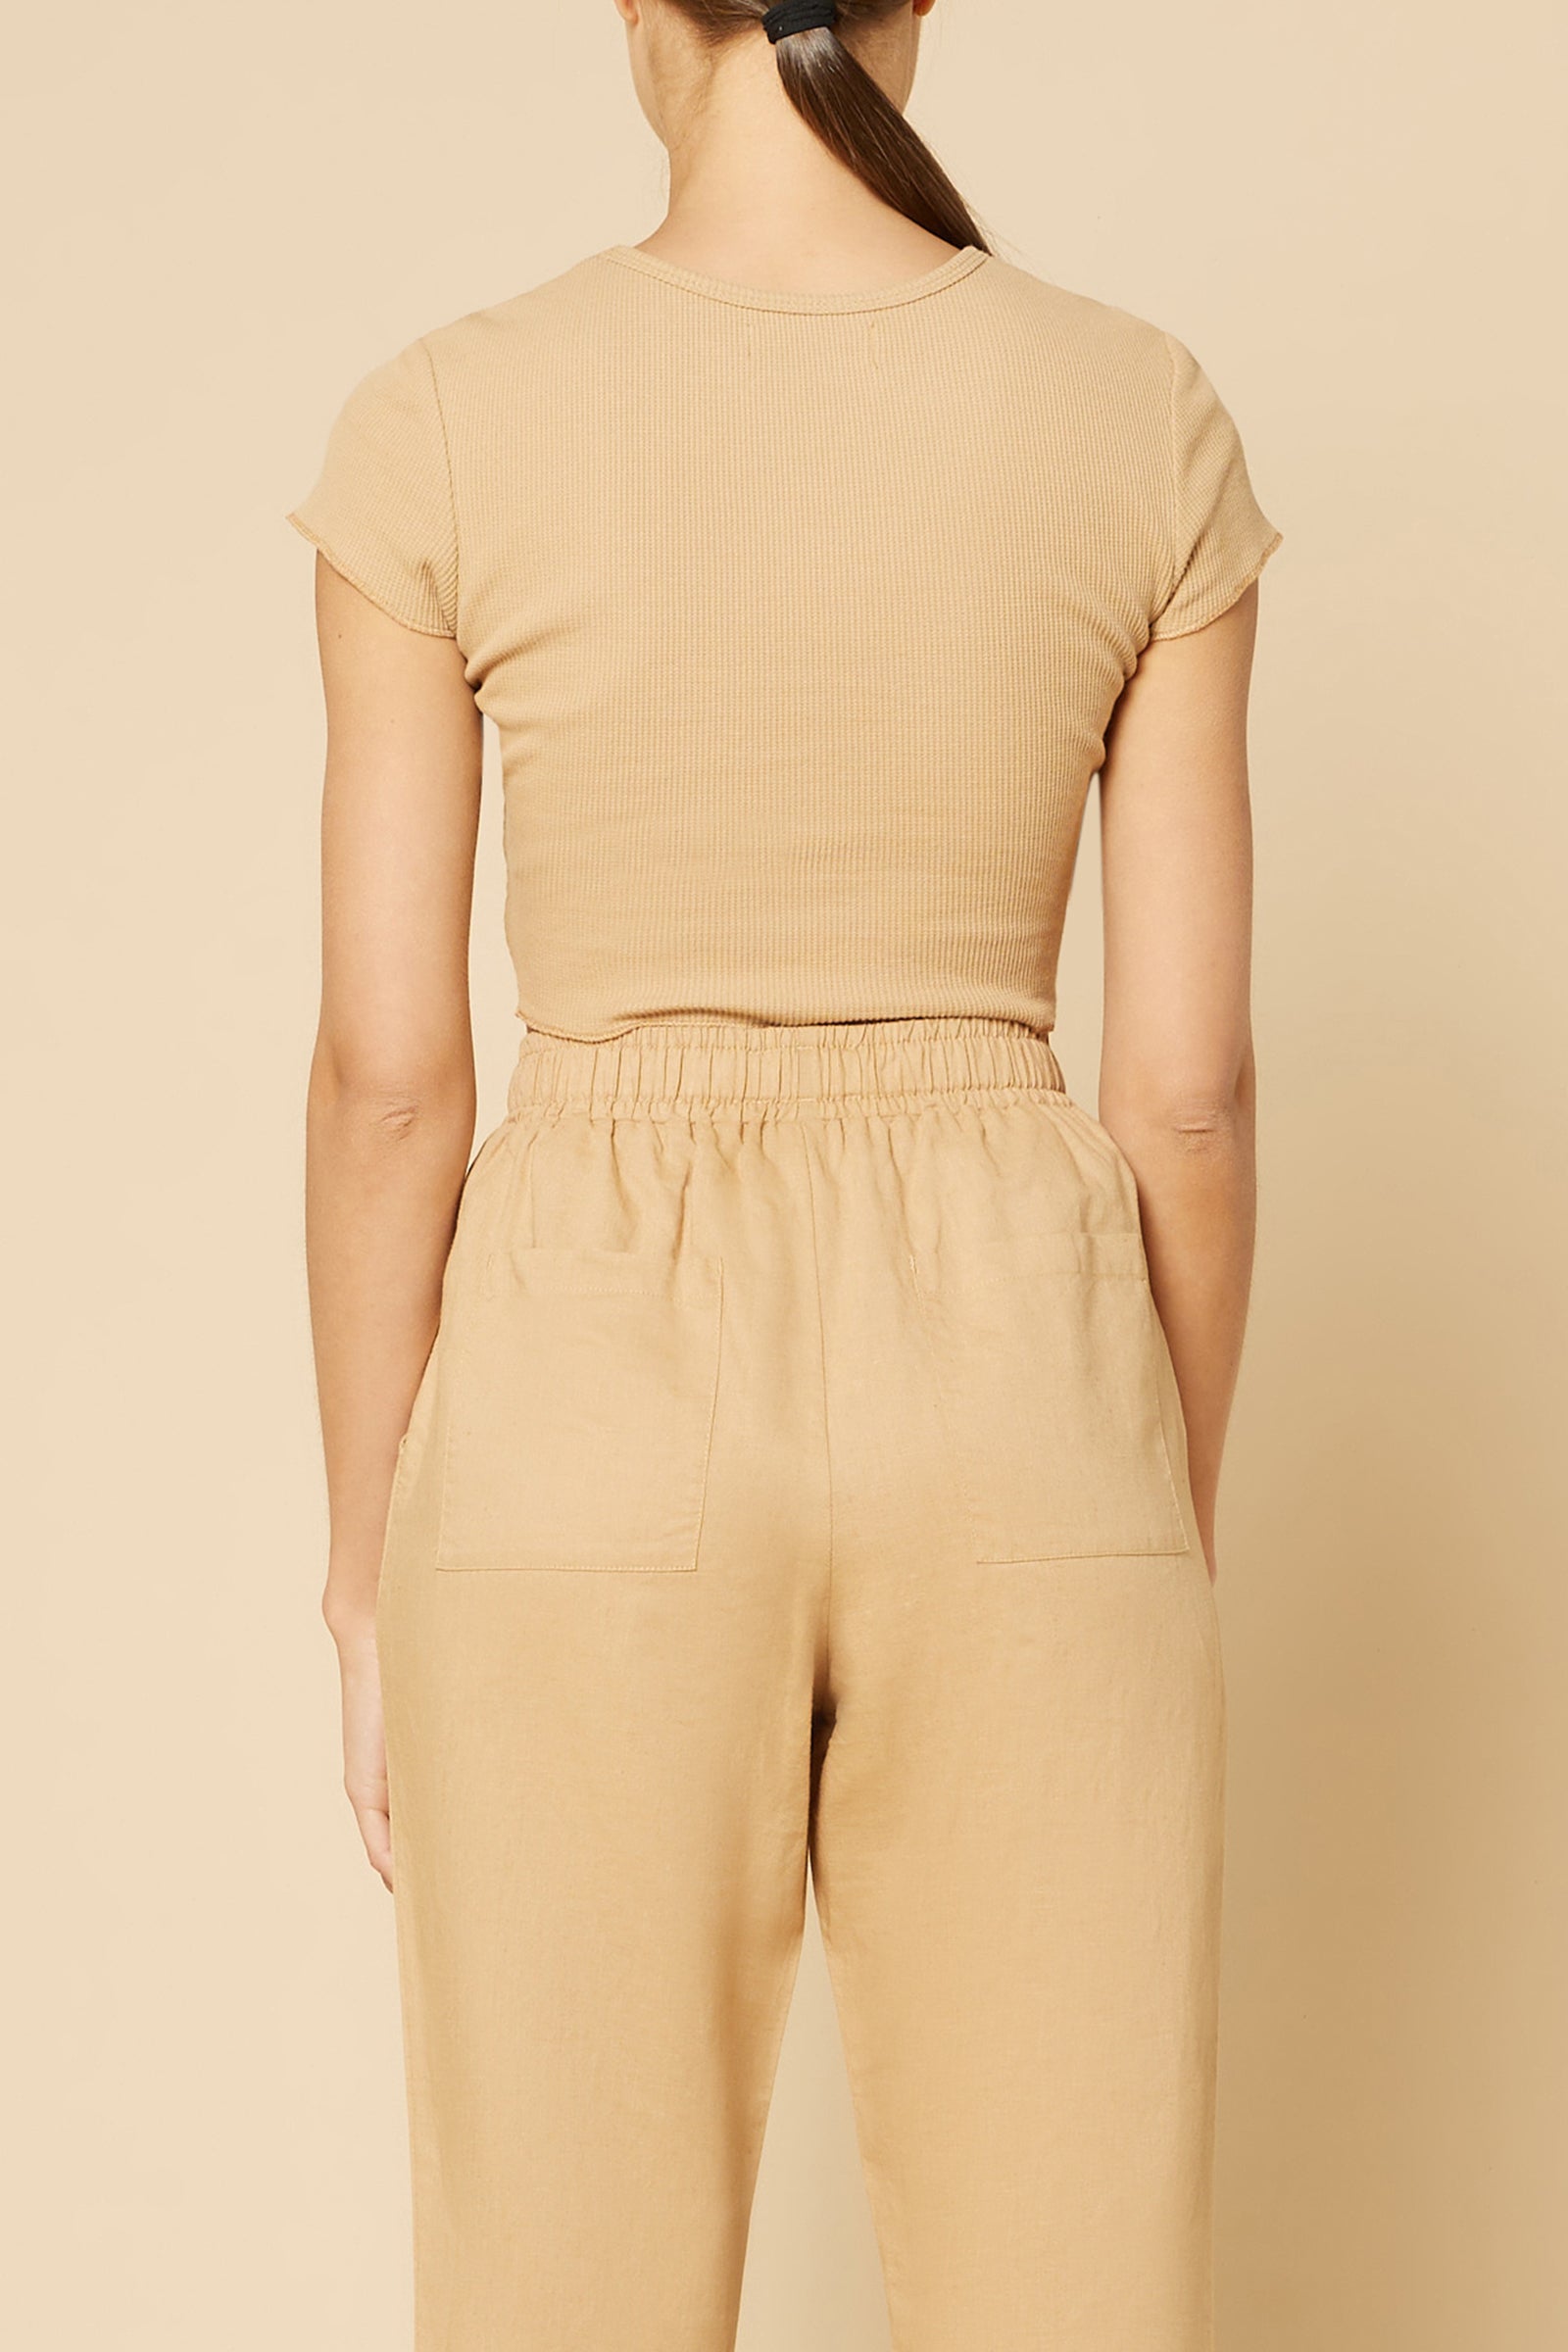 Nude Lucy Cameron Waffle Tee in a Light Brown Caramel Colour